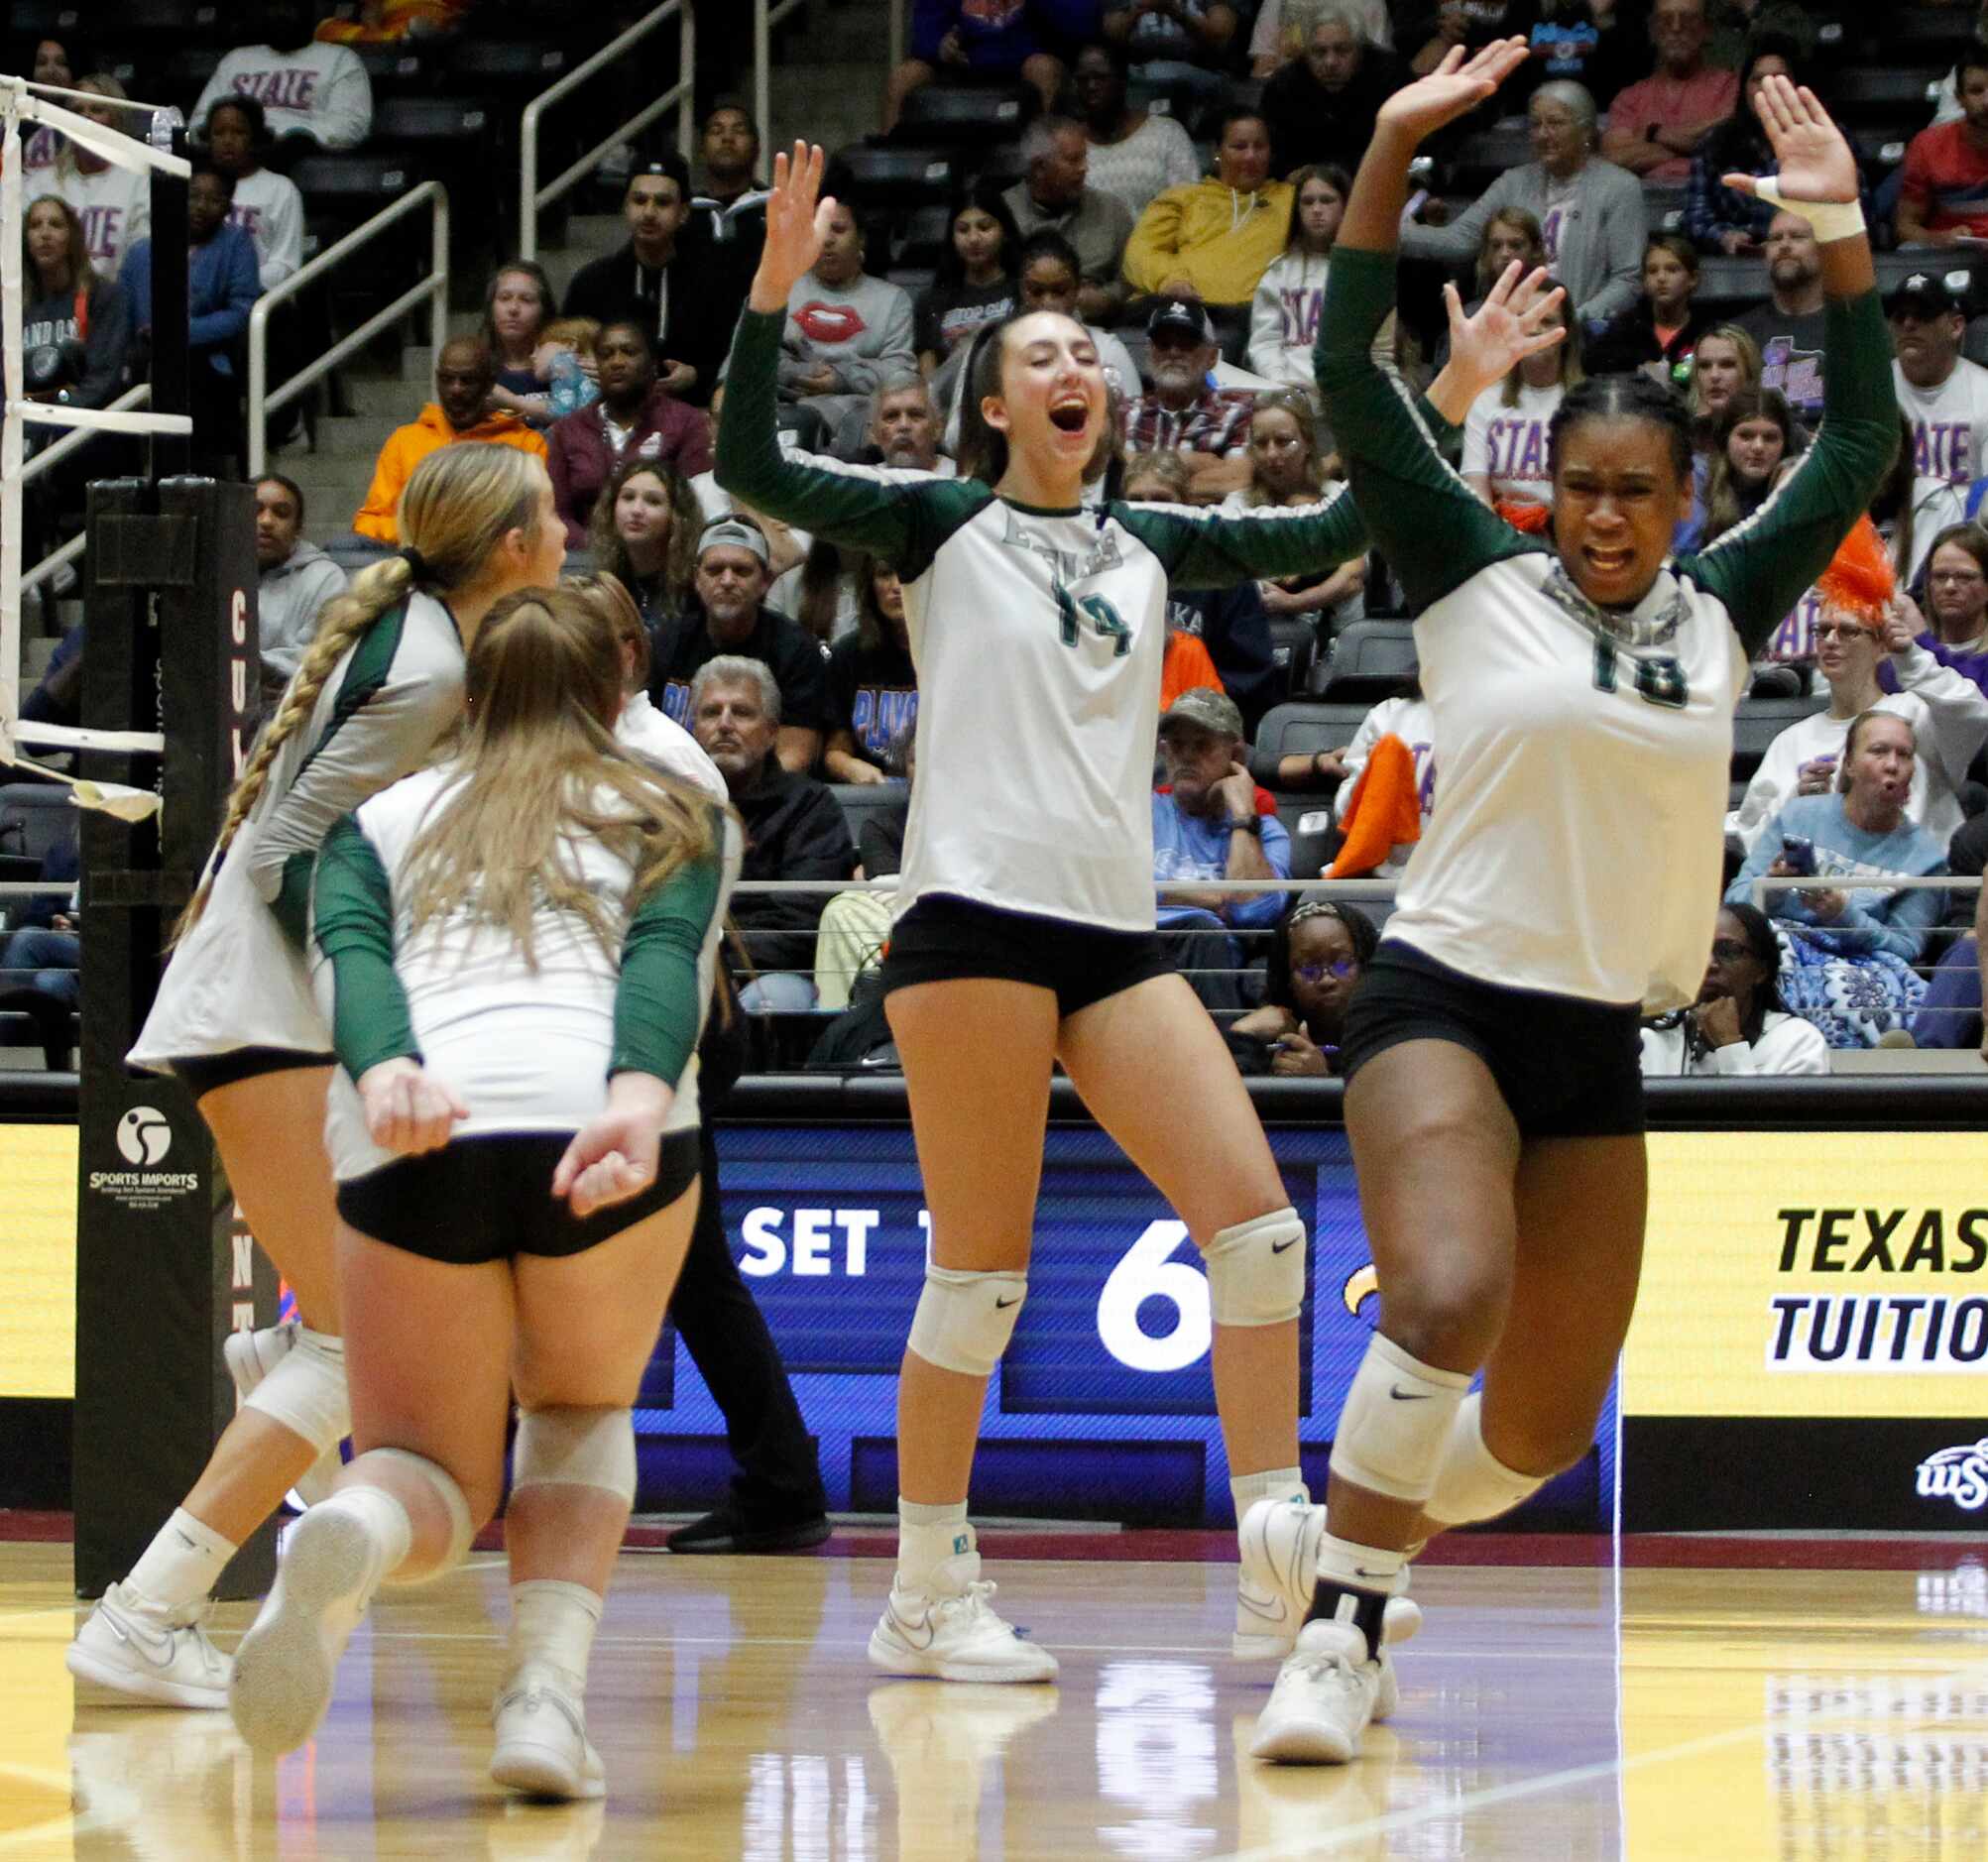 Prosper players Audrey Hunt (14), center, and Hannah Beauford (10), right, celebrate a...